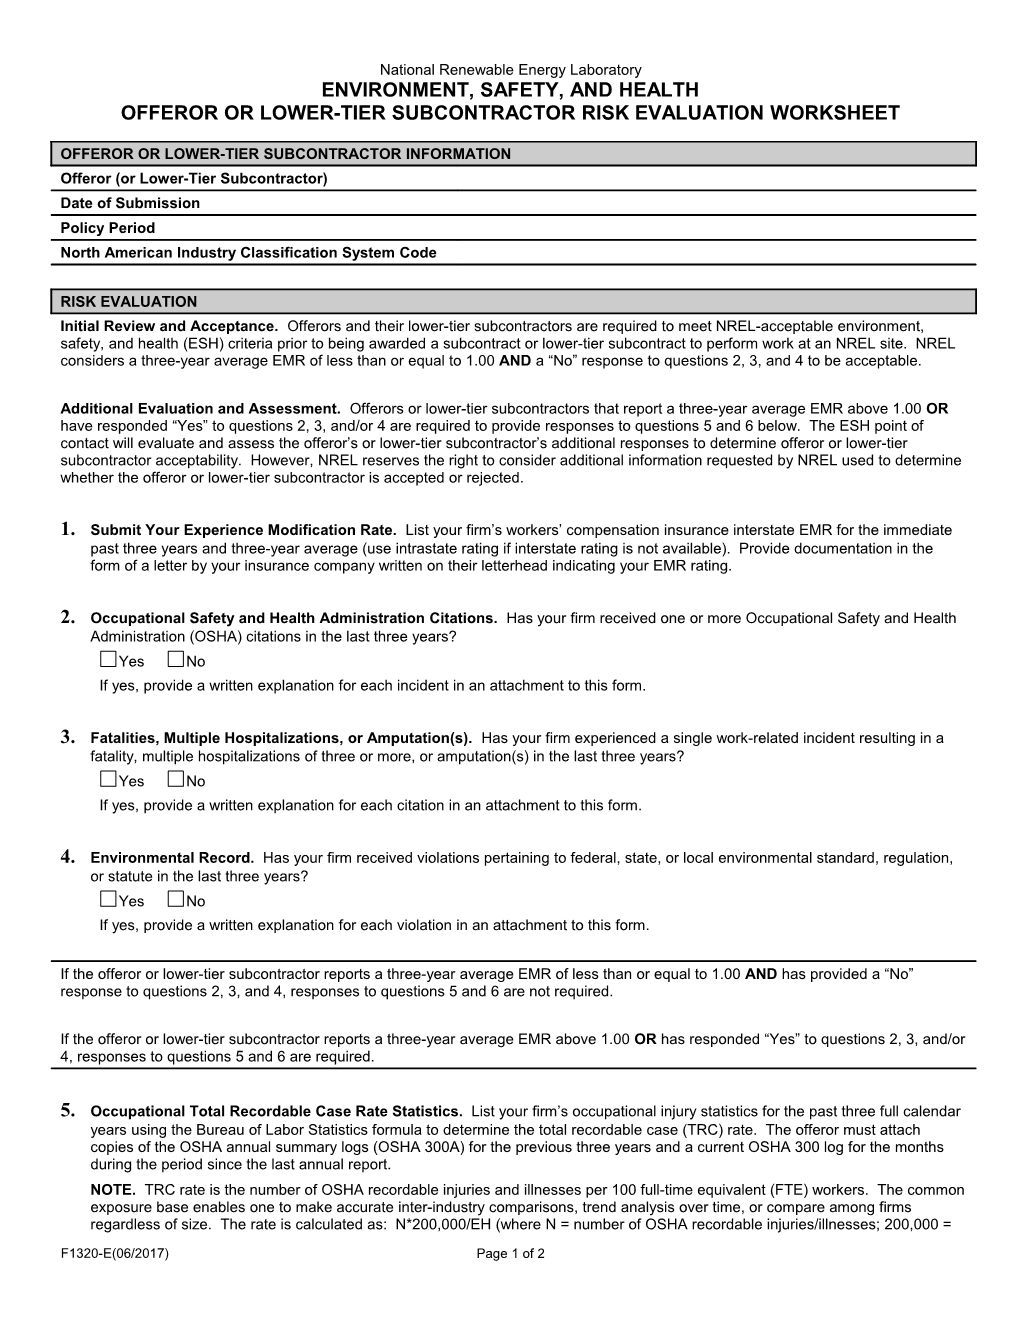 Environment, Safety, and Health Offeror Or Lower-Tier Subcontractor Risk Evaluation Worksheet